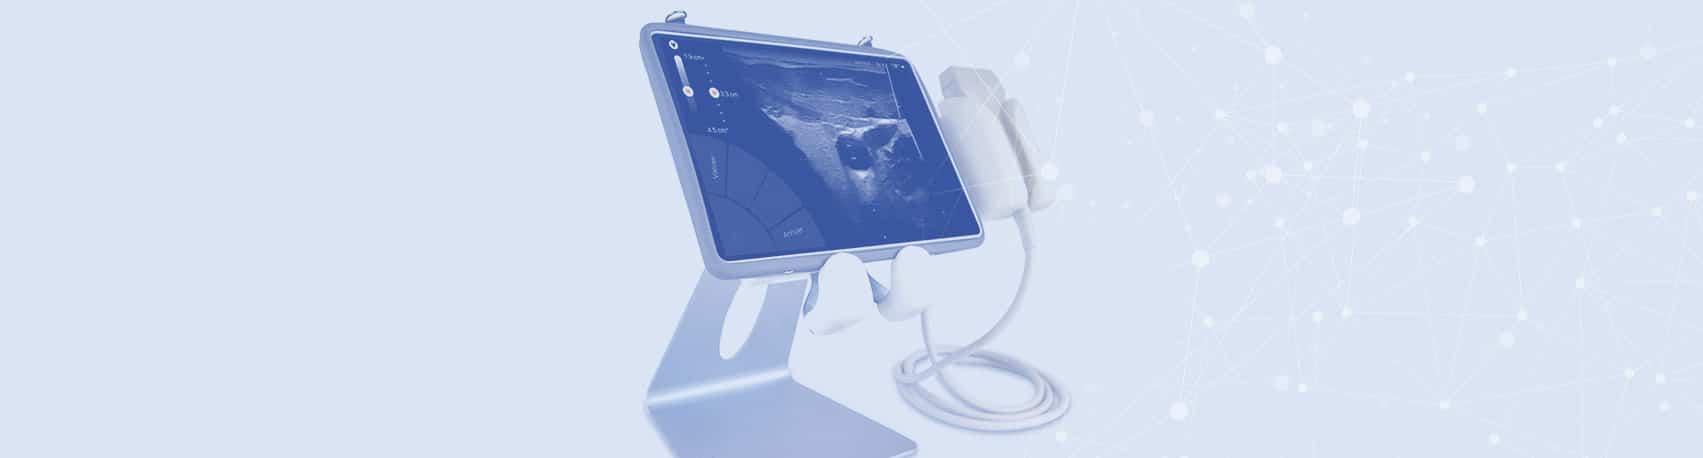 Vygon and Sonoscanner are working together on a new ultrasound scanner, unique among its kind, specifically designed for catheter placement guidance